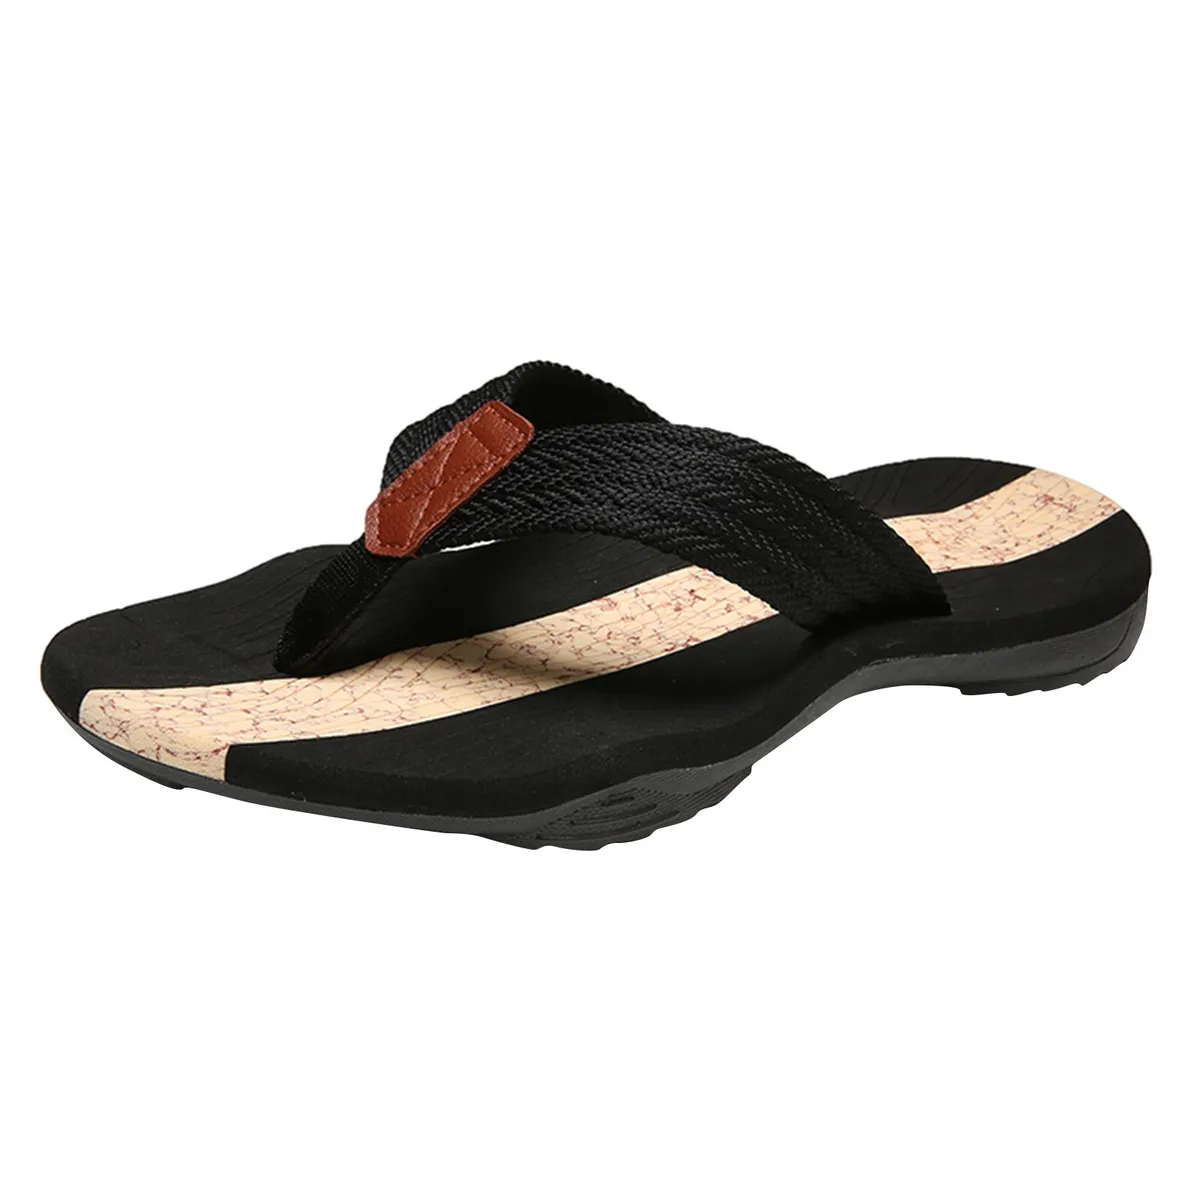 Extra Wide Flip Flops for Men with Feet Men Shoes Fashionable Flat